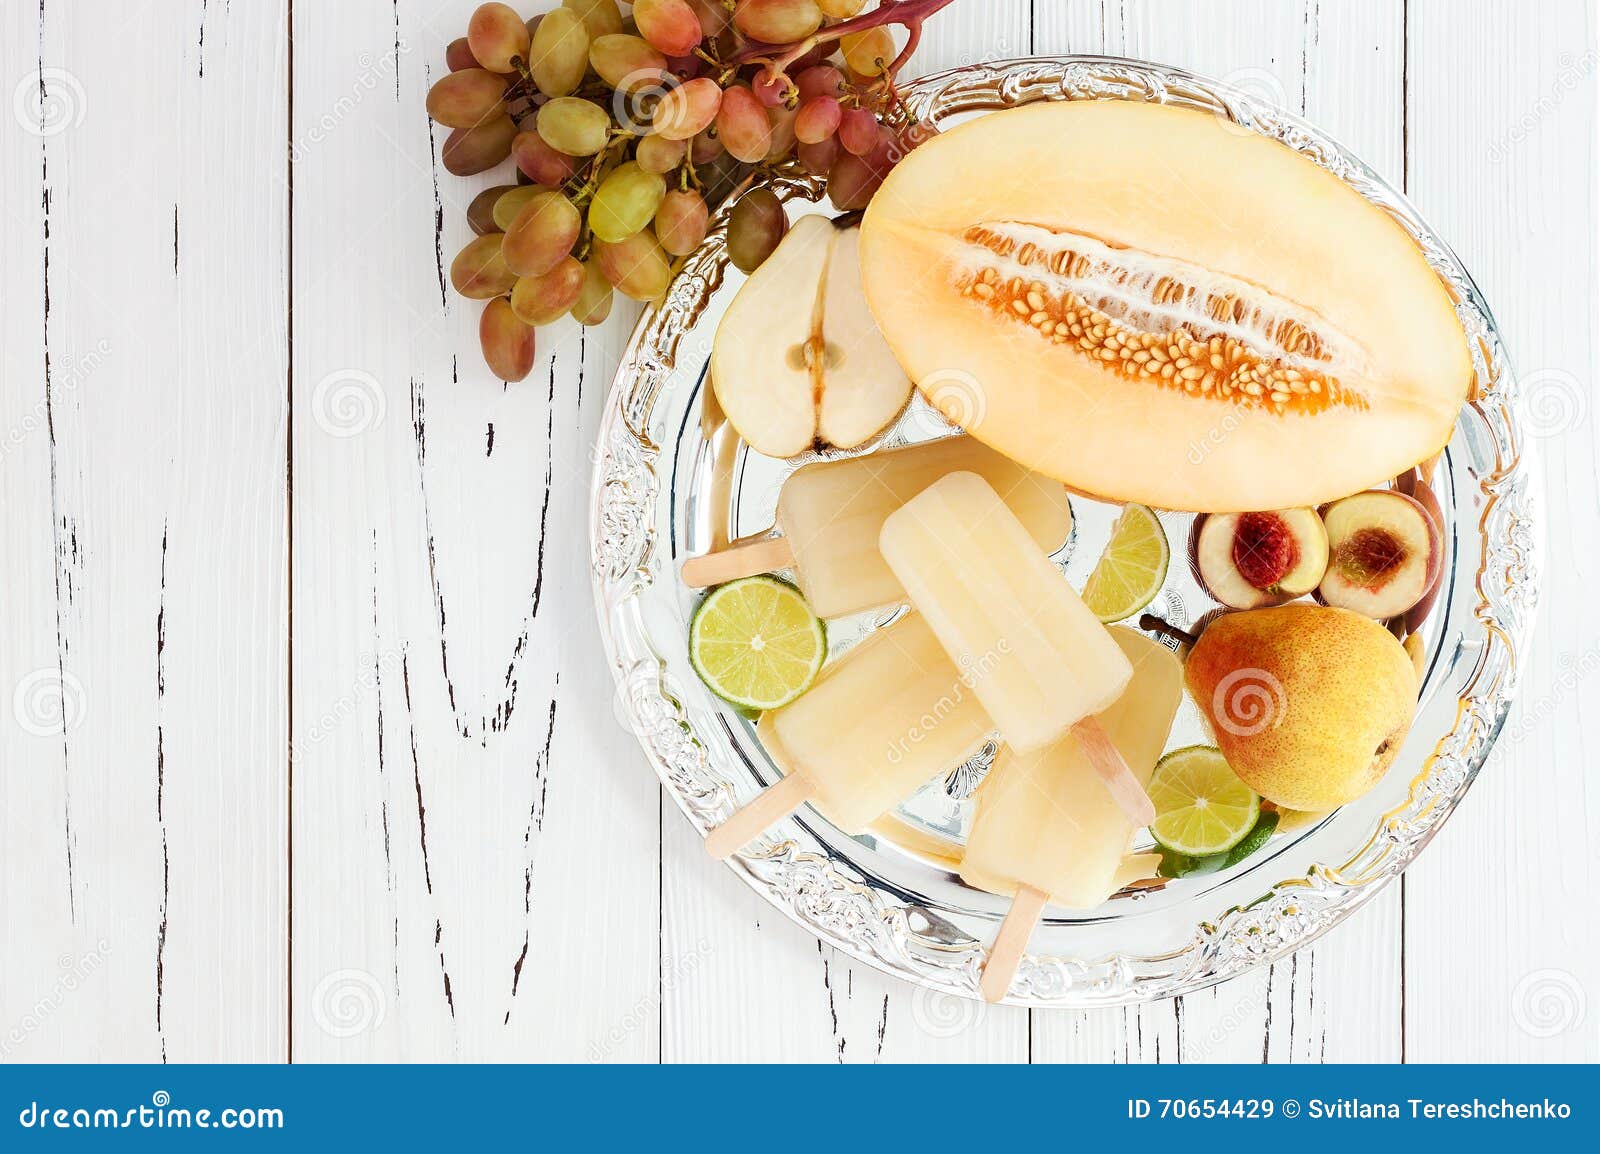 refreshing ice pops over silver tray. pear, peach, grape, lime, honeydew white sangria paletas - popsicles. top view